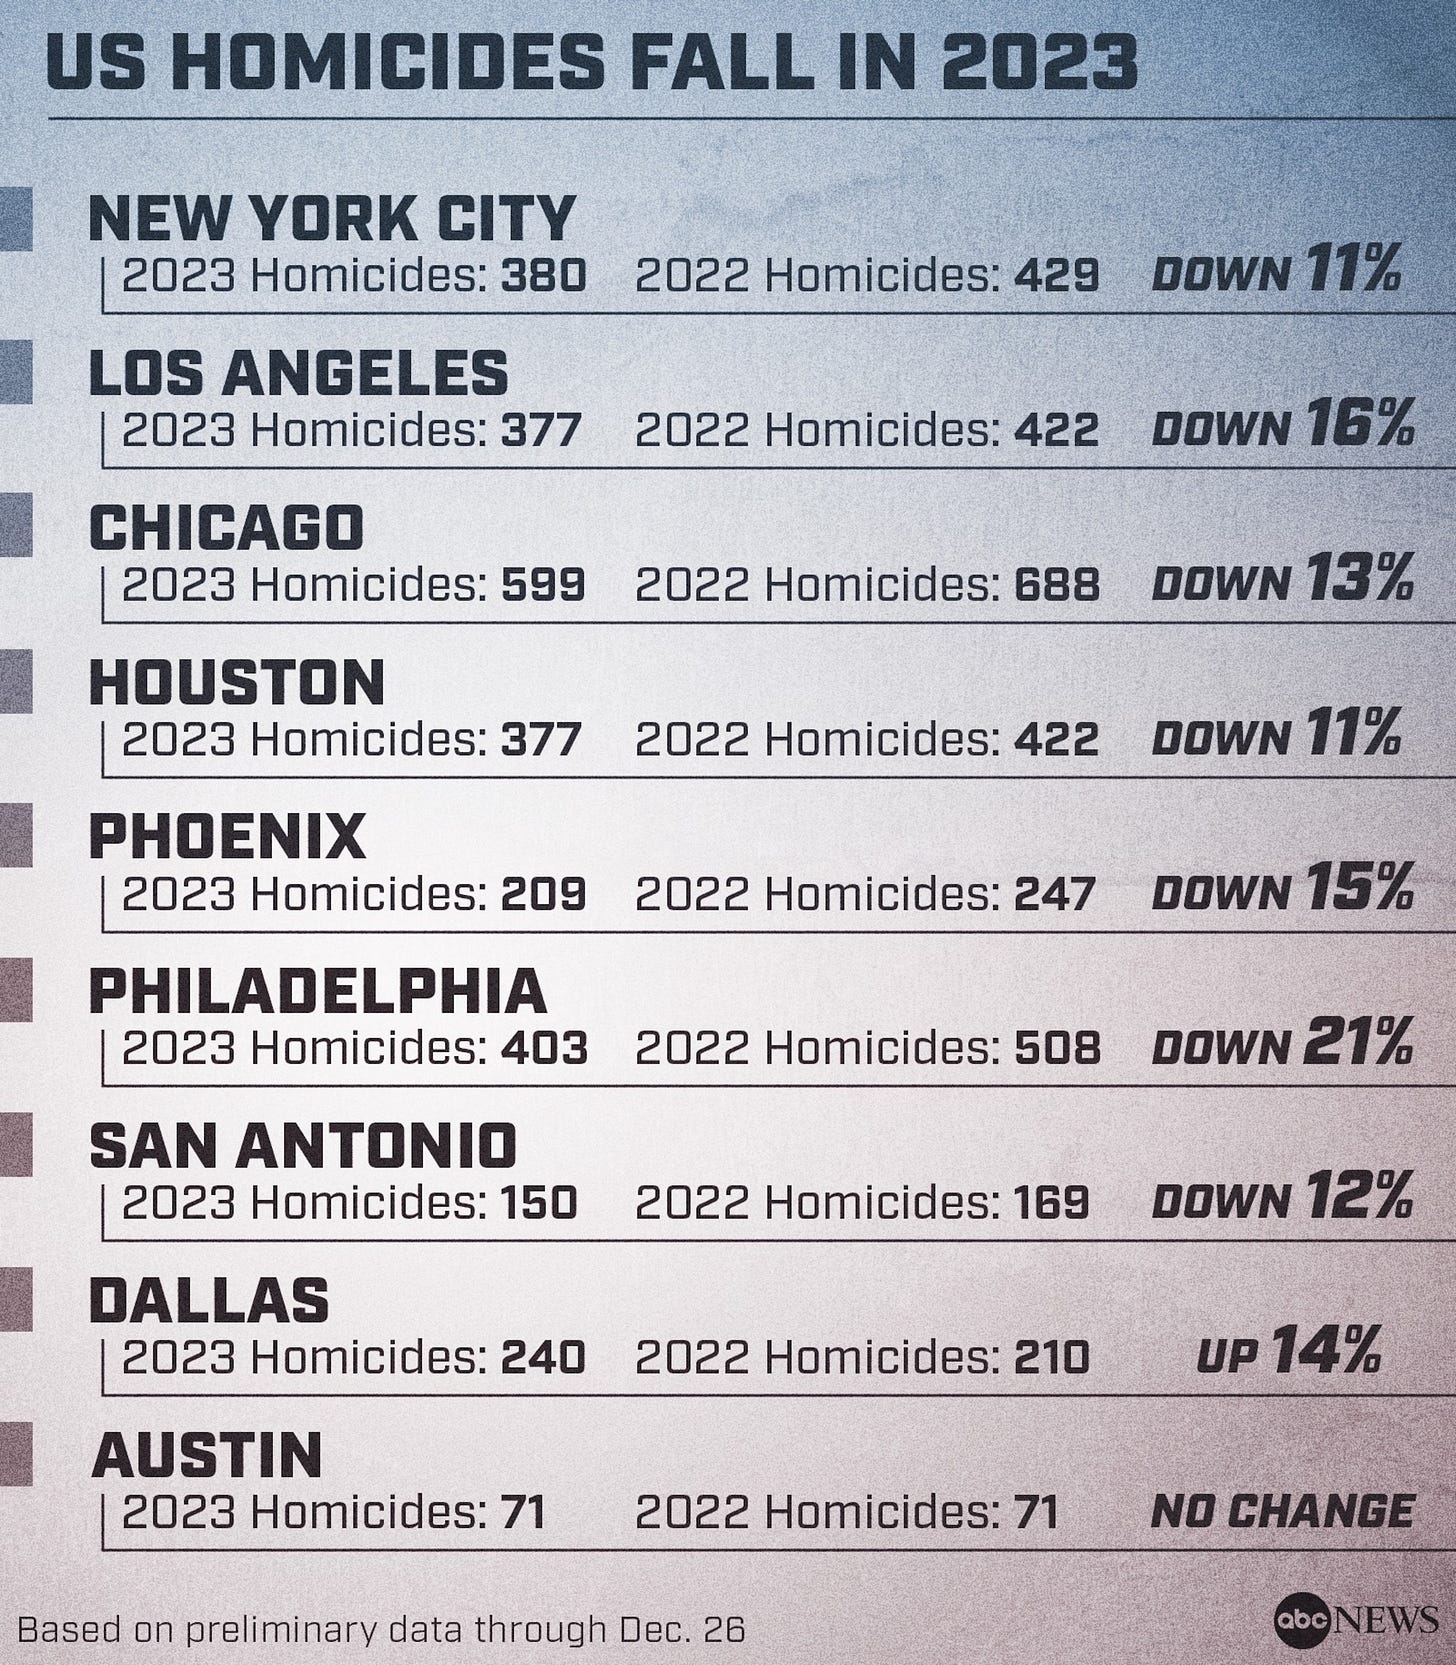 PHOTO: US Homicides Fall in 2023